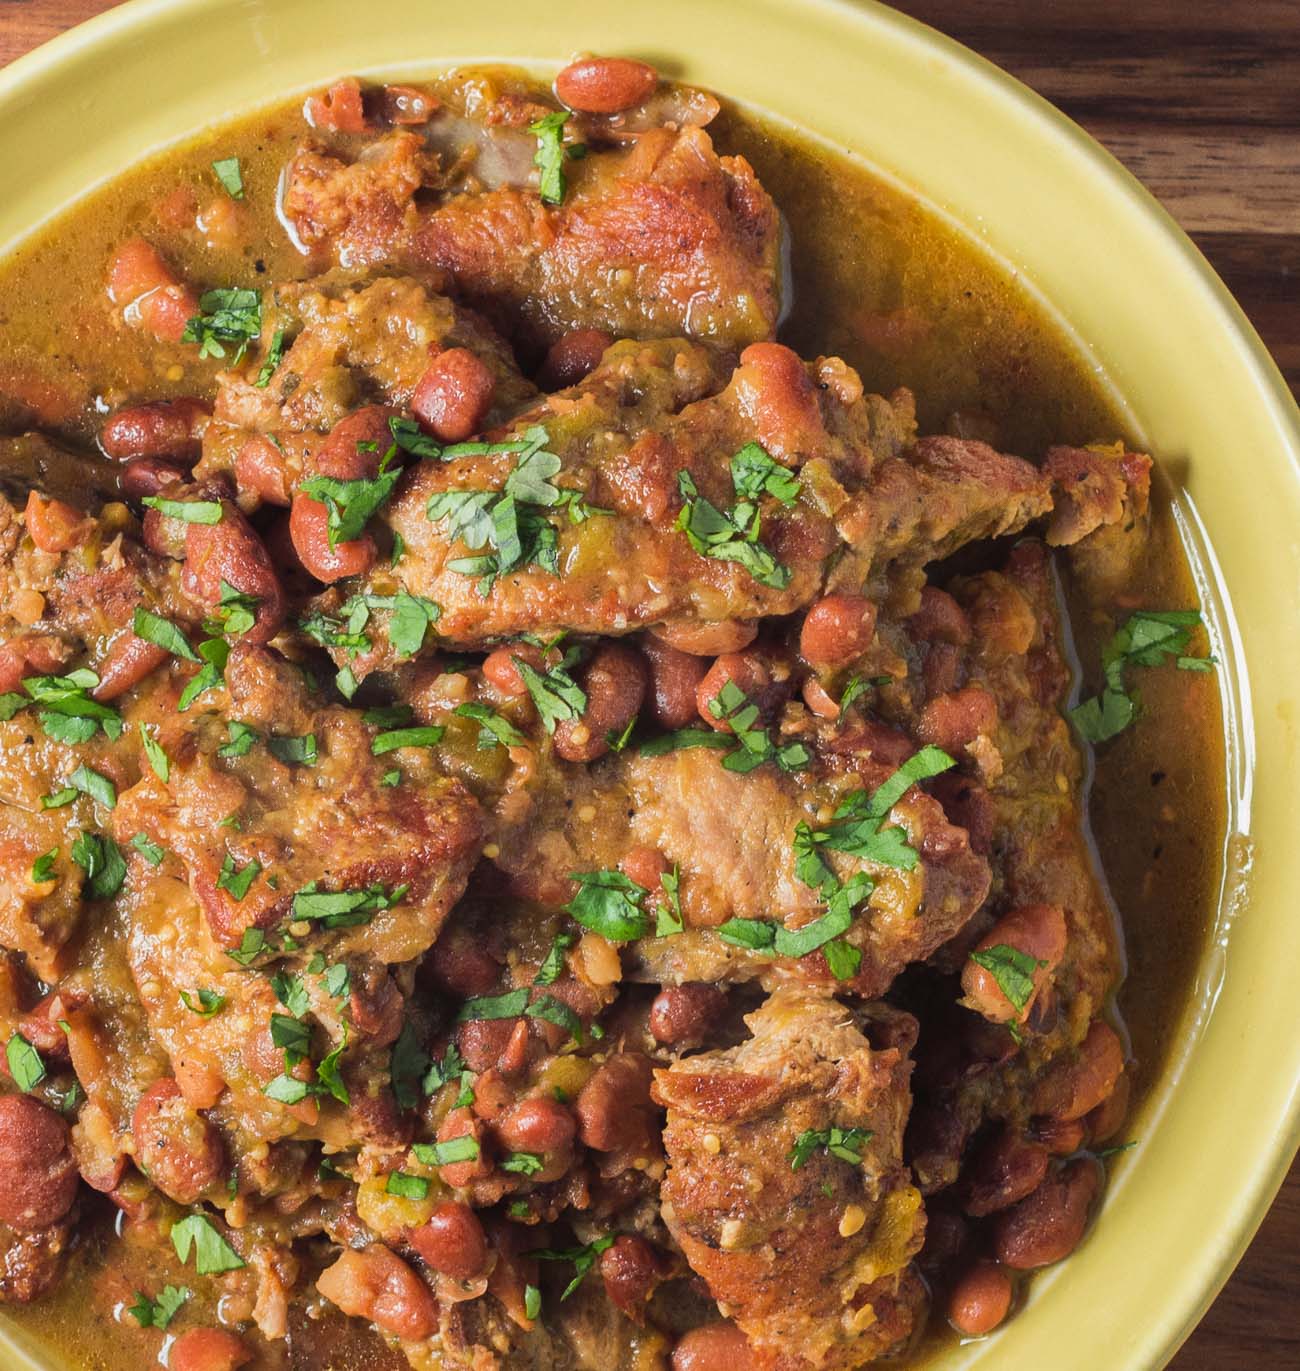 Braised pork with tomatillos and pinto bean chili